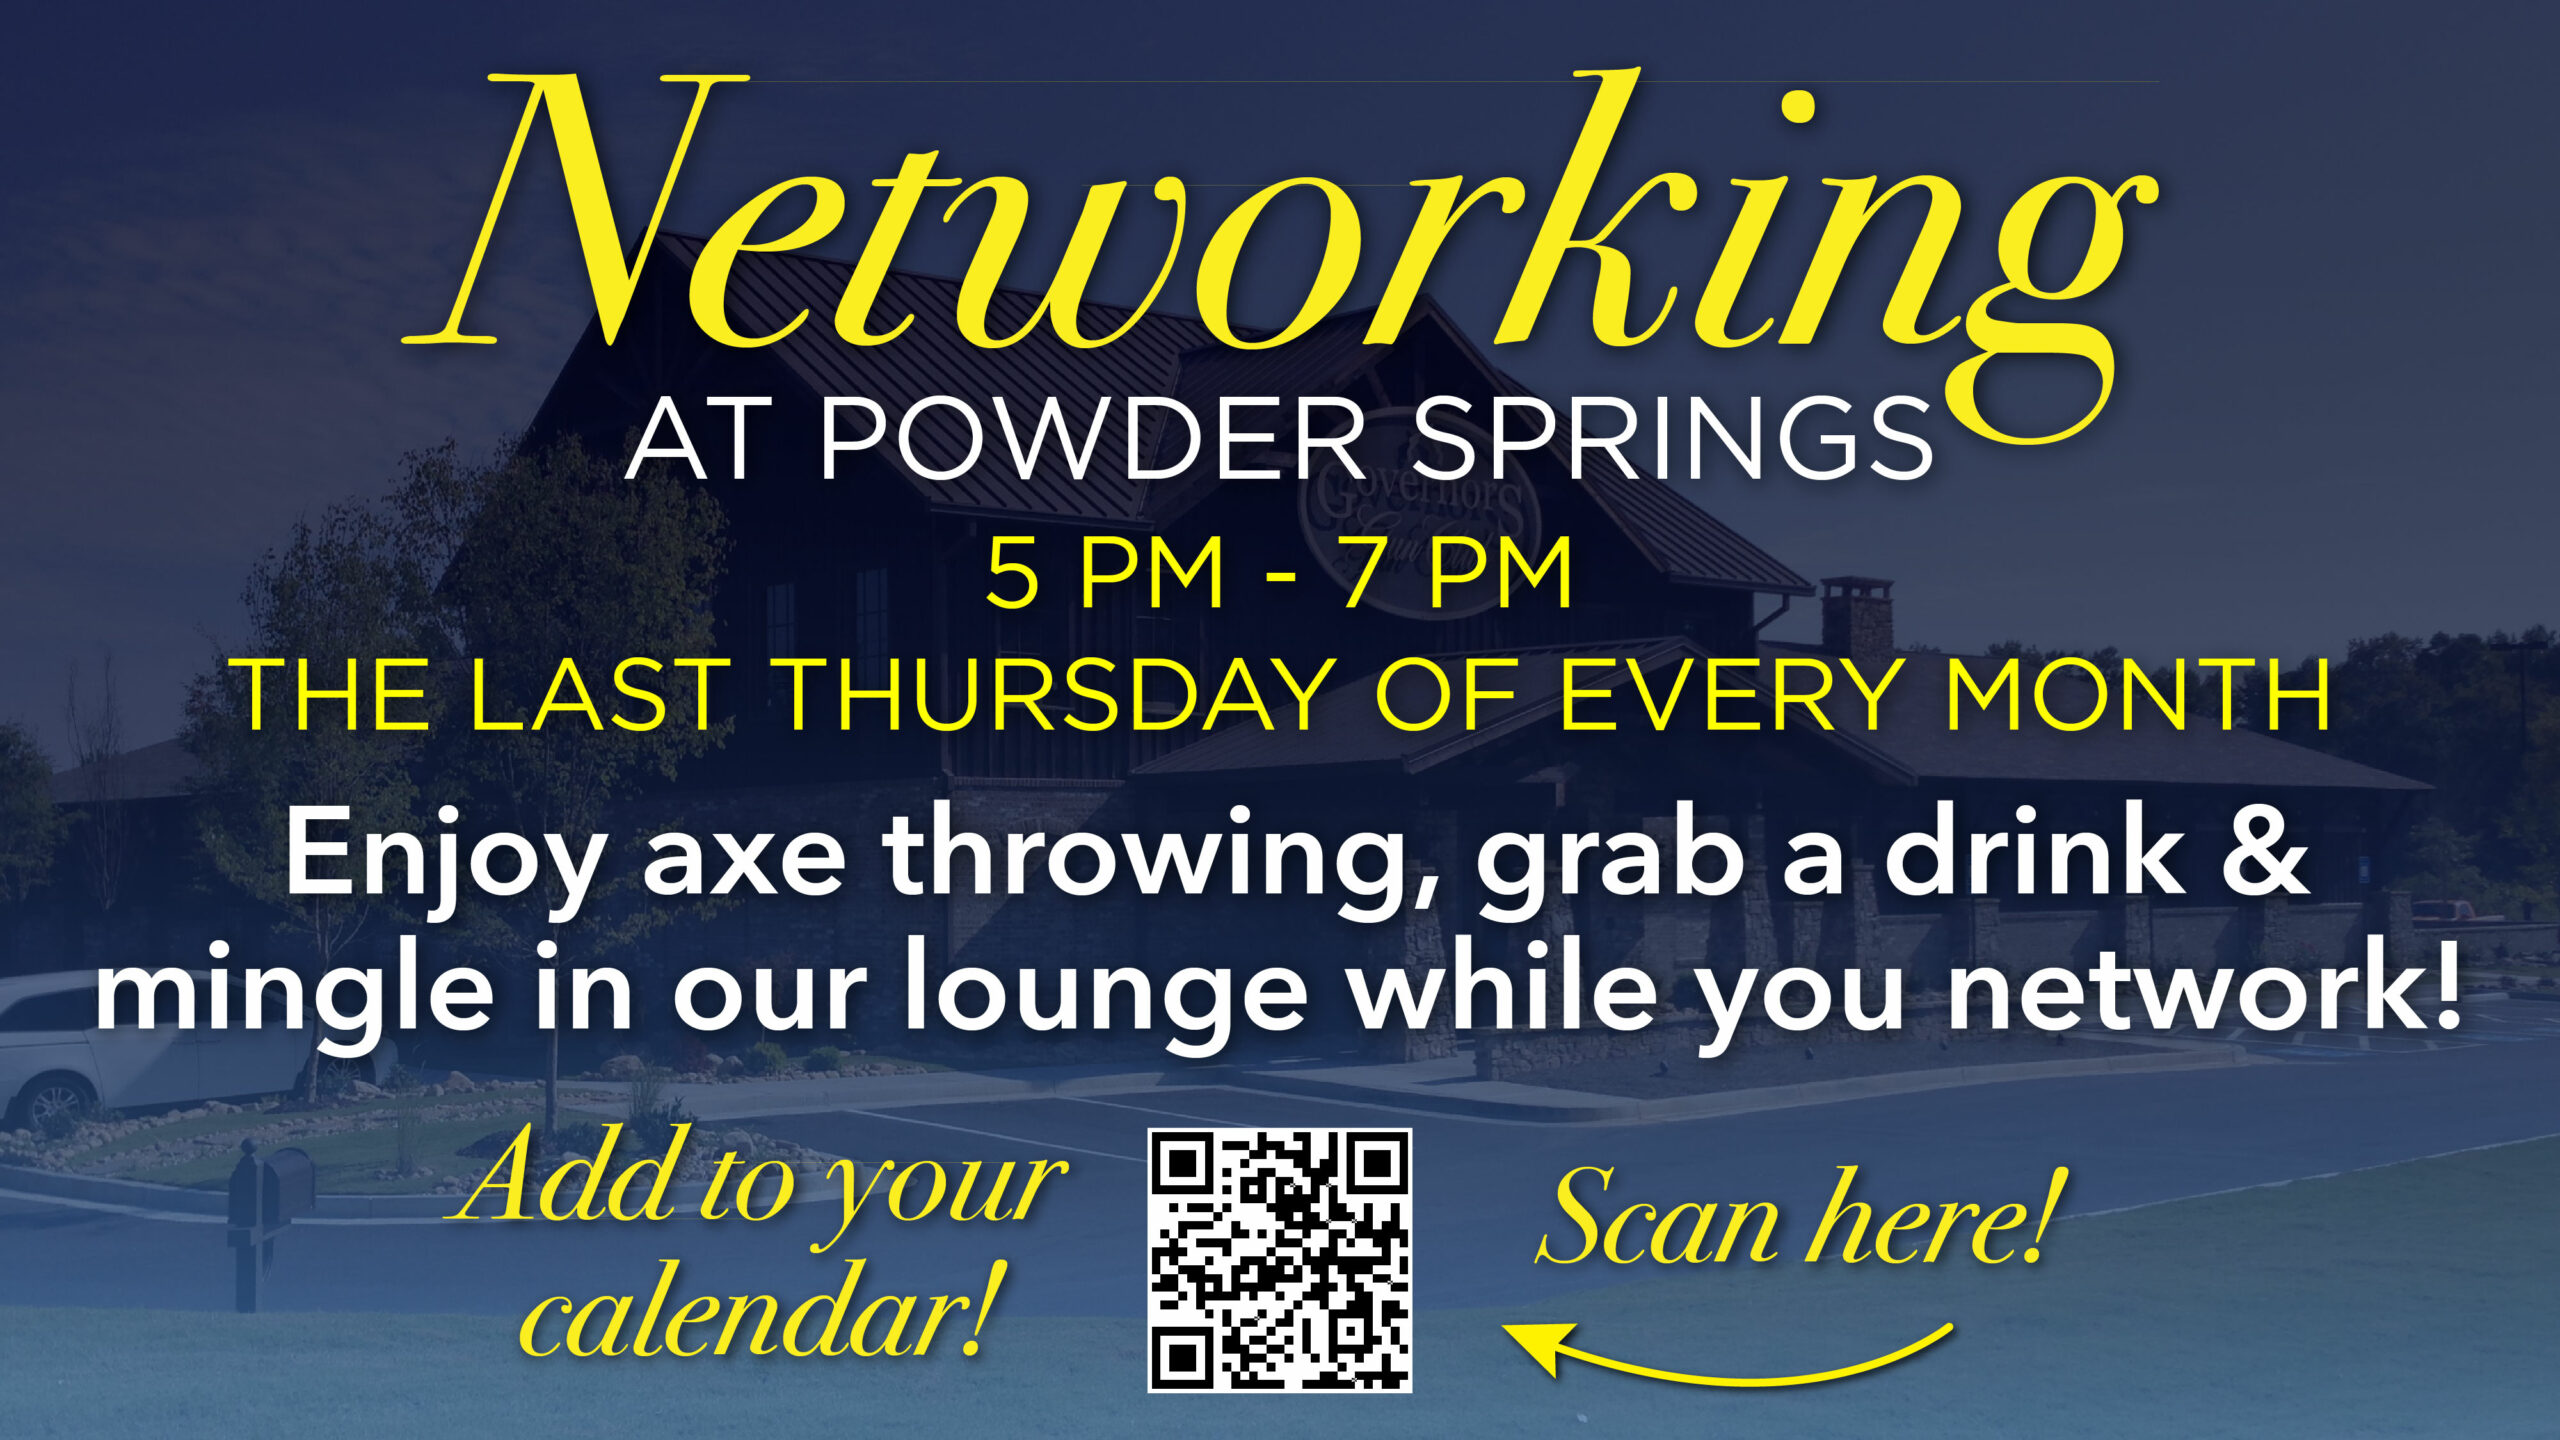 Networking at Powder Springs